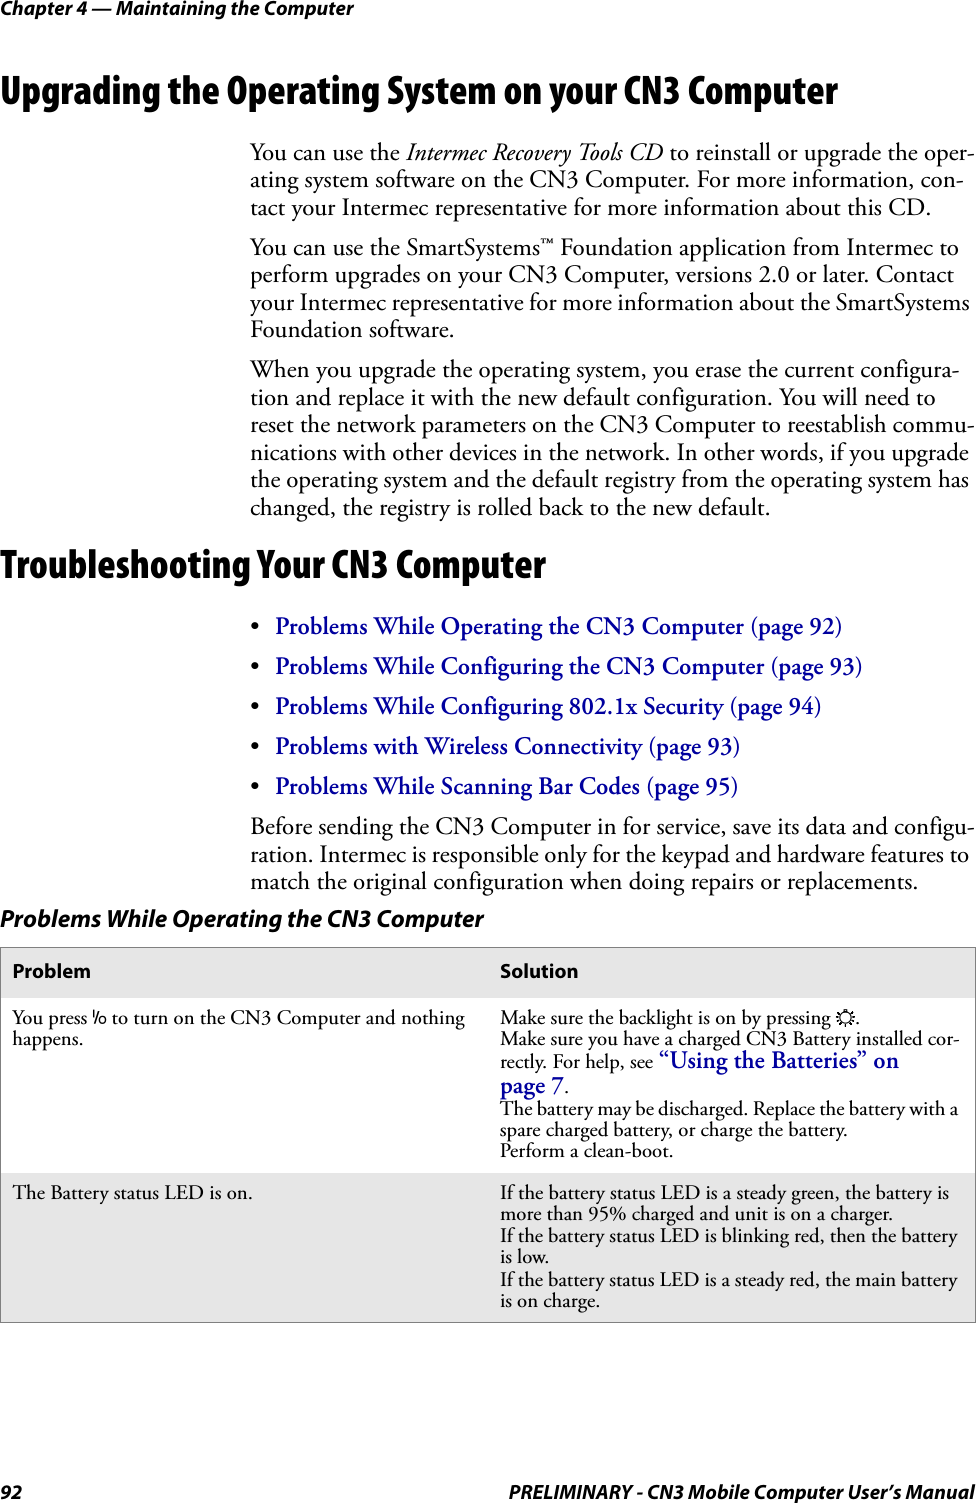 Chapter 4 — Maintaining the Computer92 PRELIMINARY - CN3 Mobile Computer User’s ManualUpgrading the Operating System on your CN3 ComputerYou can use the Intermec Recovery Tools CD to reinstall or upgrade the oper-ating system software on the CN3 Computer. For more information, con-tact your Intermec representative for more information about this CD.You can use the SmartSystems™ Foundation application from Intermec to perform upgrades on your CN3 Computer, versions 2.0 or later. Contact your Intermec representative for more information about the SmartSystems Foundation software.When you upgrade the operating system, you erase the current configura-tion and replace it with the new default configuration. You will need to reset the network parameters on the CN3 Computer to reestablish commu-nications with other devices in the network. In other words, if you upgrade the operating system and the default registry from the operating system has changed, the registry is rolled back to the new default.Troubleshooting Your CN3 Computer•Problems While Operating the CN3 Computer (page 92)•Problems While Configuring the CN3 Computer (page 93)•Problems While Configuring 802.1x Security (page 94)•Problems with Wireless Connectivity (page 93)•Problems While Scanning Bar Codes (page 95)Before sending the CN3 Computer in for service, save its data and configu-ration. Intermec is responsible only for the keypad and hardware features to match the original configuration when doing repairs or replacements.Problems While Operating the CN3 ComputerProblem SolutionYou press I to turn on the CN3 Computer and nothing happens.Make sure the backlight is on by pressing E.Make sure you have a charged CN3 Battery installed cor-rectly. For help, see “Using the Batteries” on page 7.The battery may be discharged. Replace the battery with a spare charged battery, or charge the battery.Perform a clean-boot.The Battery status LED is on. If the battery status LED is a steady green, the battery is more than 95% charged and unit is on a charger.If the battery status LED is blinking red, then the battery is low.If the battery status LED is a steady red, the main battery is on charge.